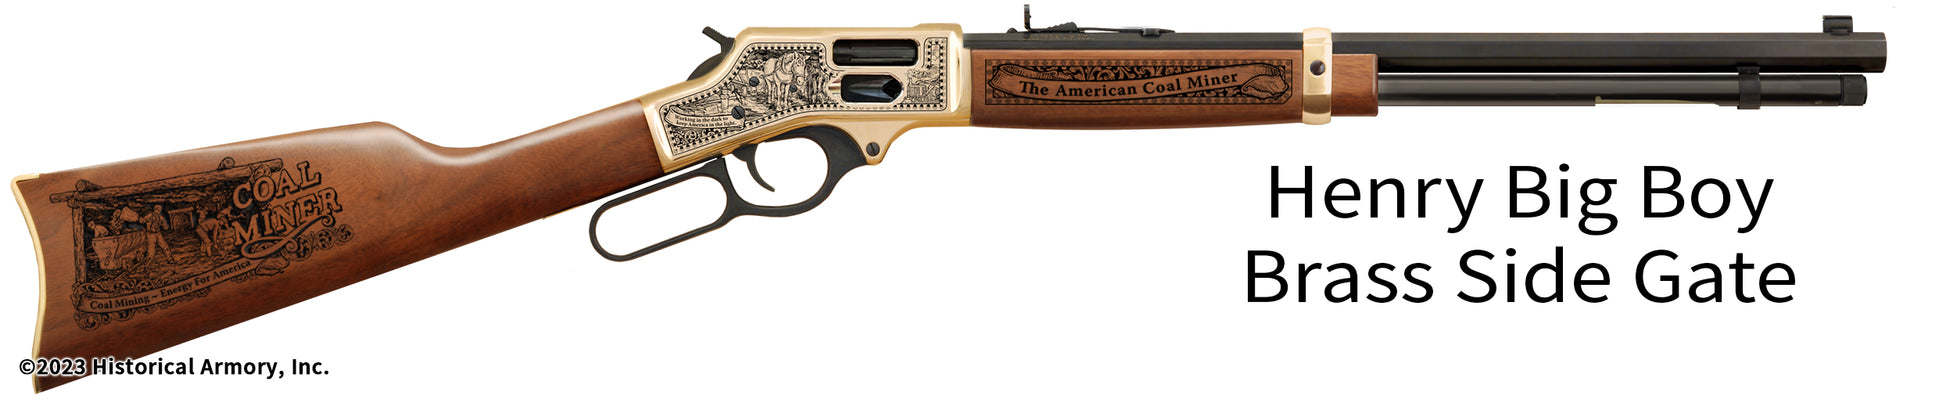 American Coal Miner Limited Edition Engraved Henry Big Boy  Rifle